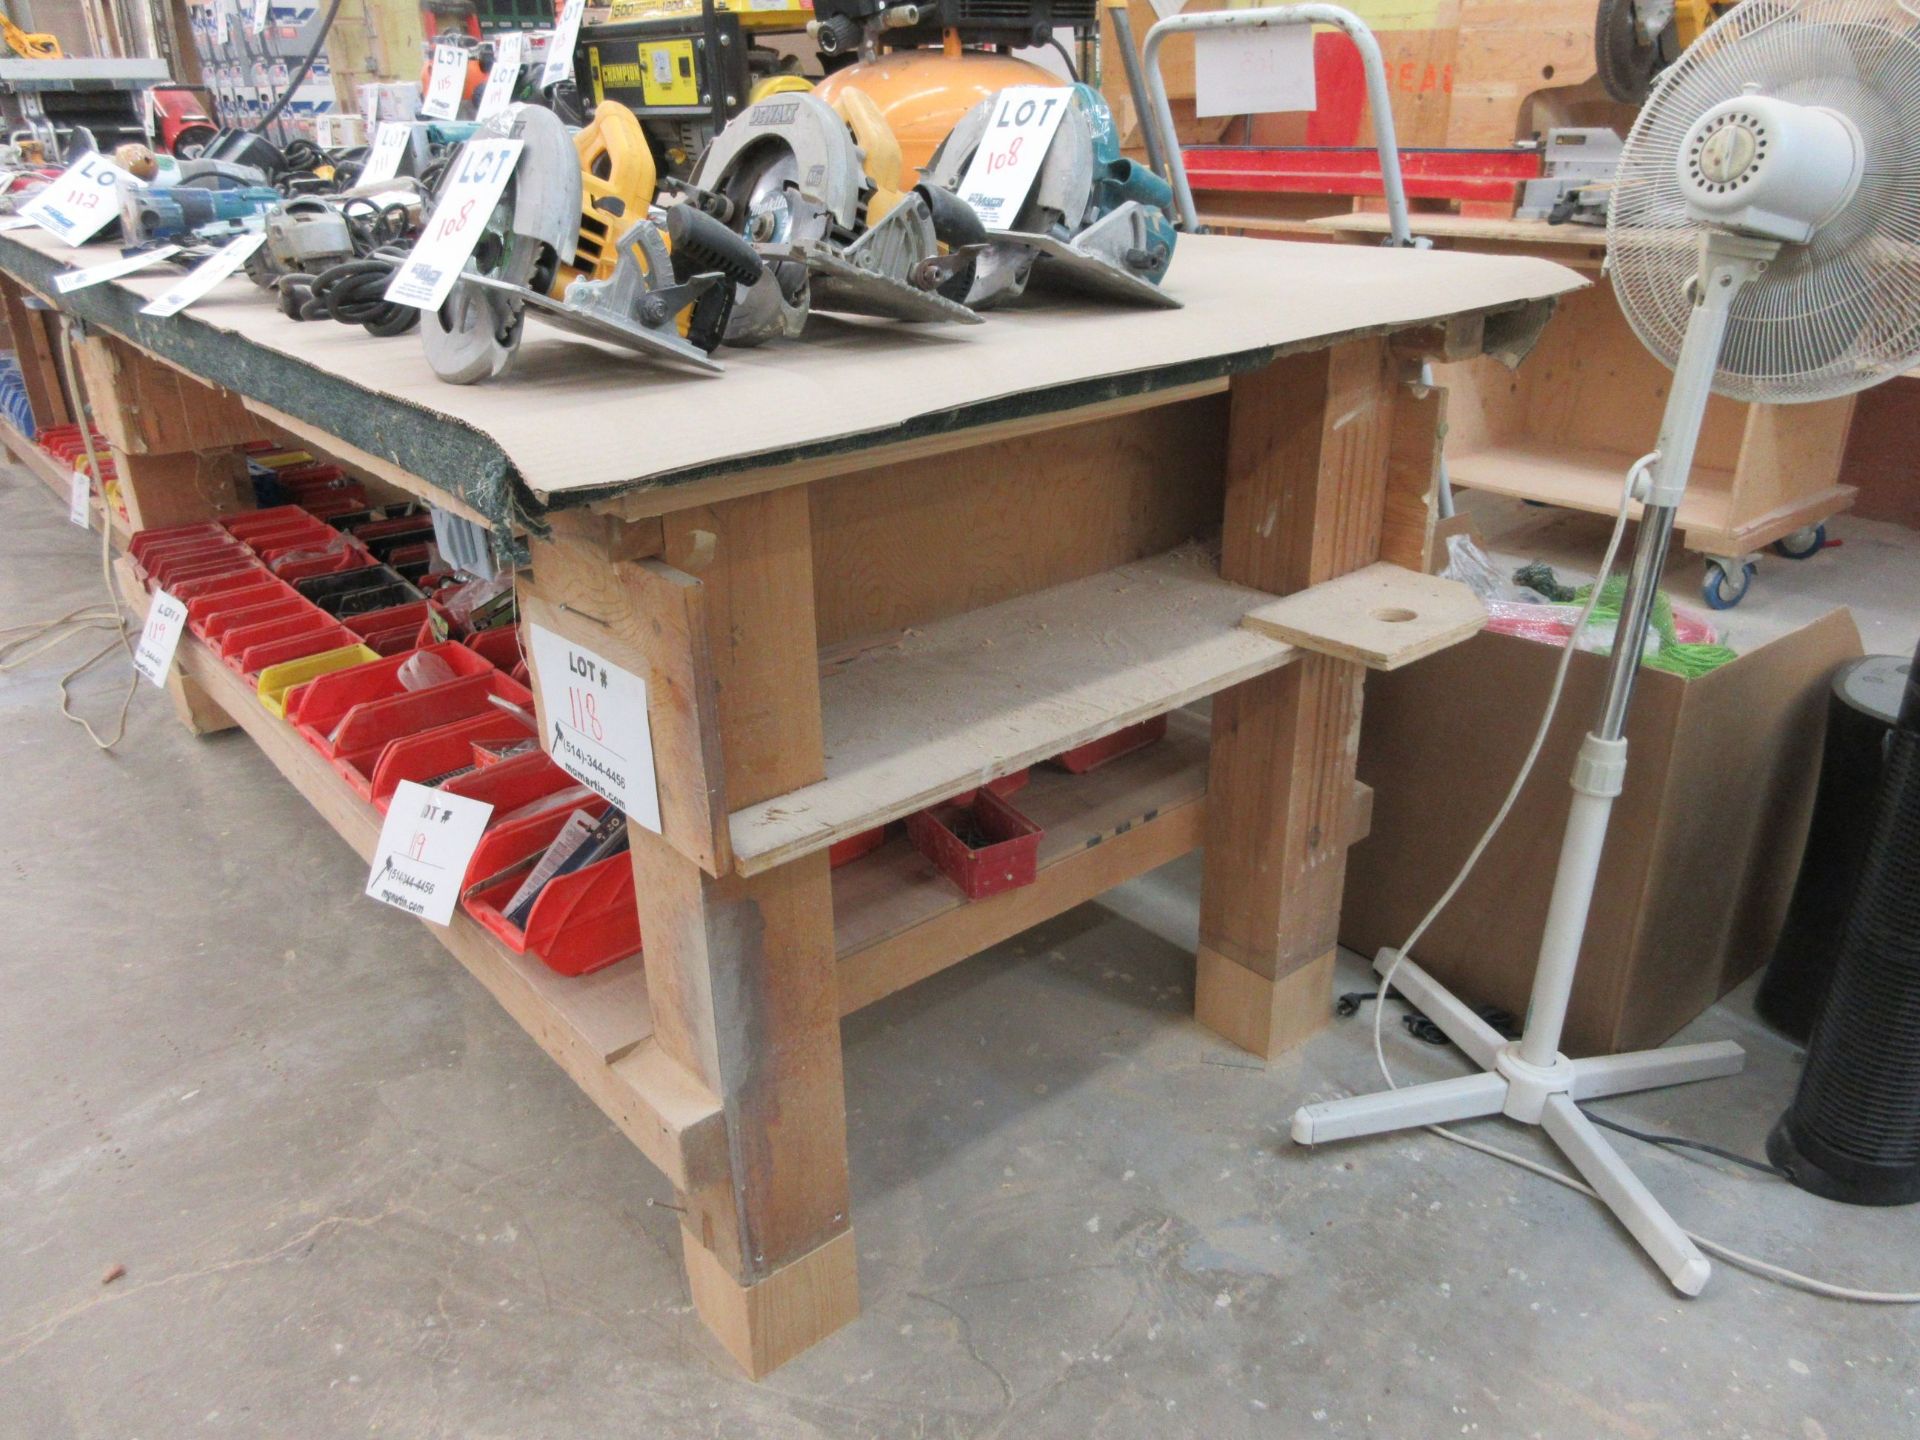 Work tables c/w electrical outlets aprox 5ft x 8ft (2) - Image 3 of 3